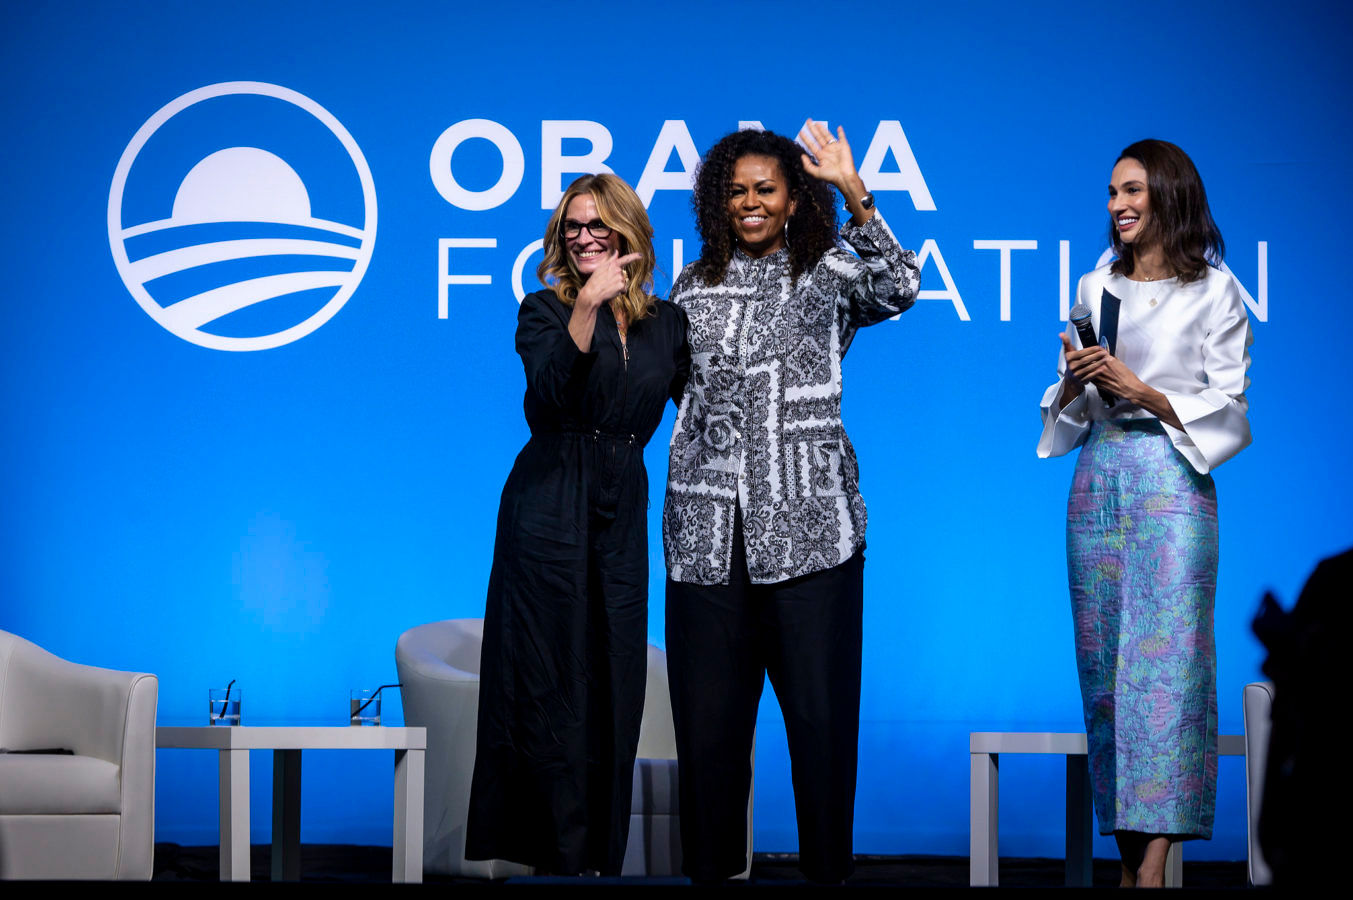 Deborah Henry shares 5 key takeaways from her conversation with Michelle Obama and Julia Roberts